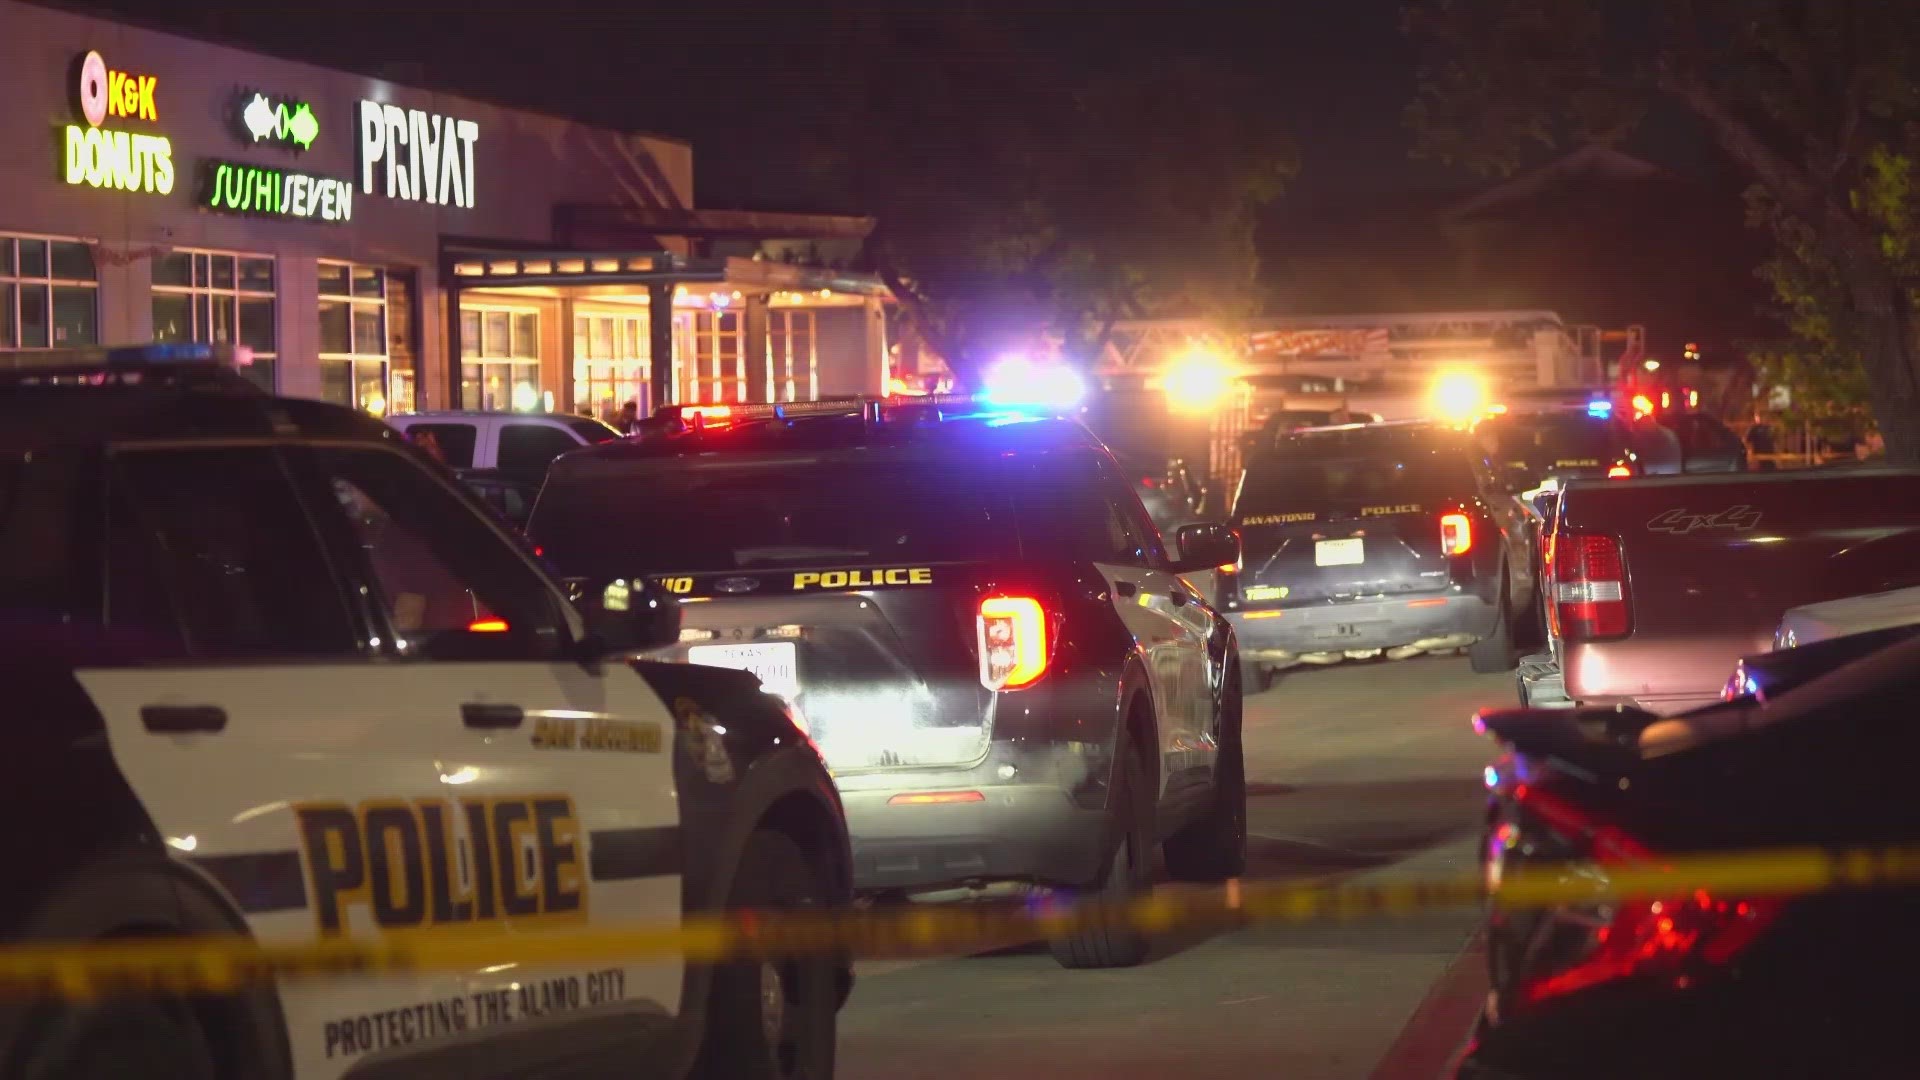 Video shows inside of North Star Mall following deadly shooting